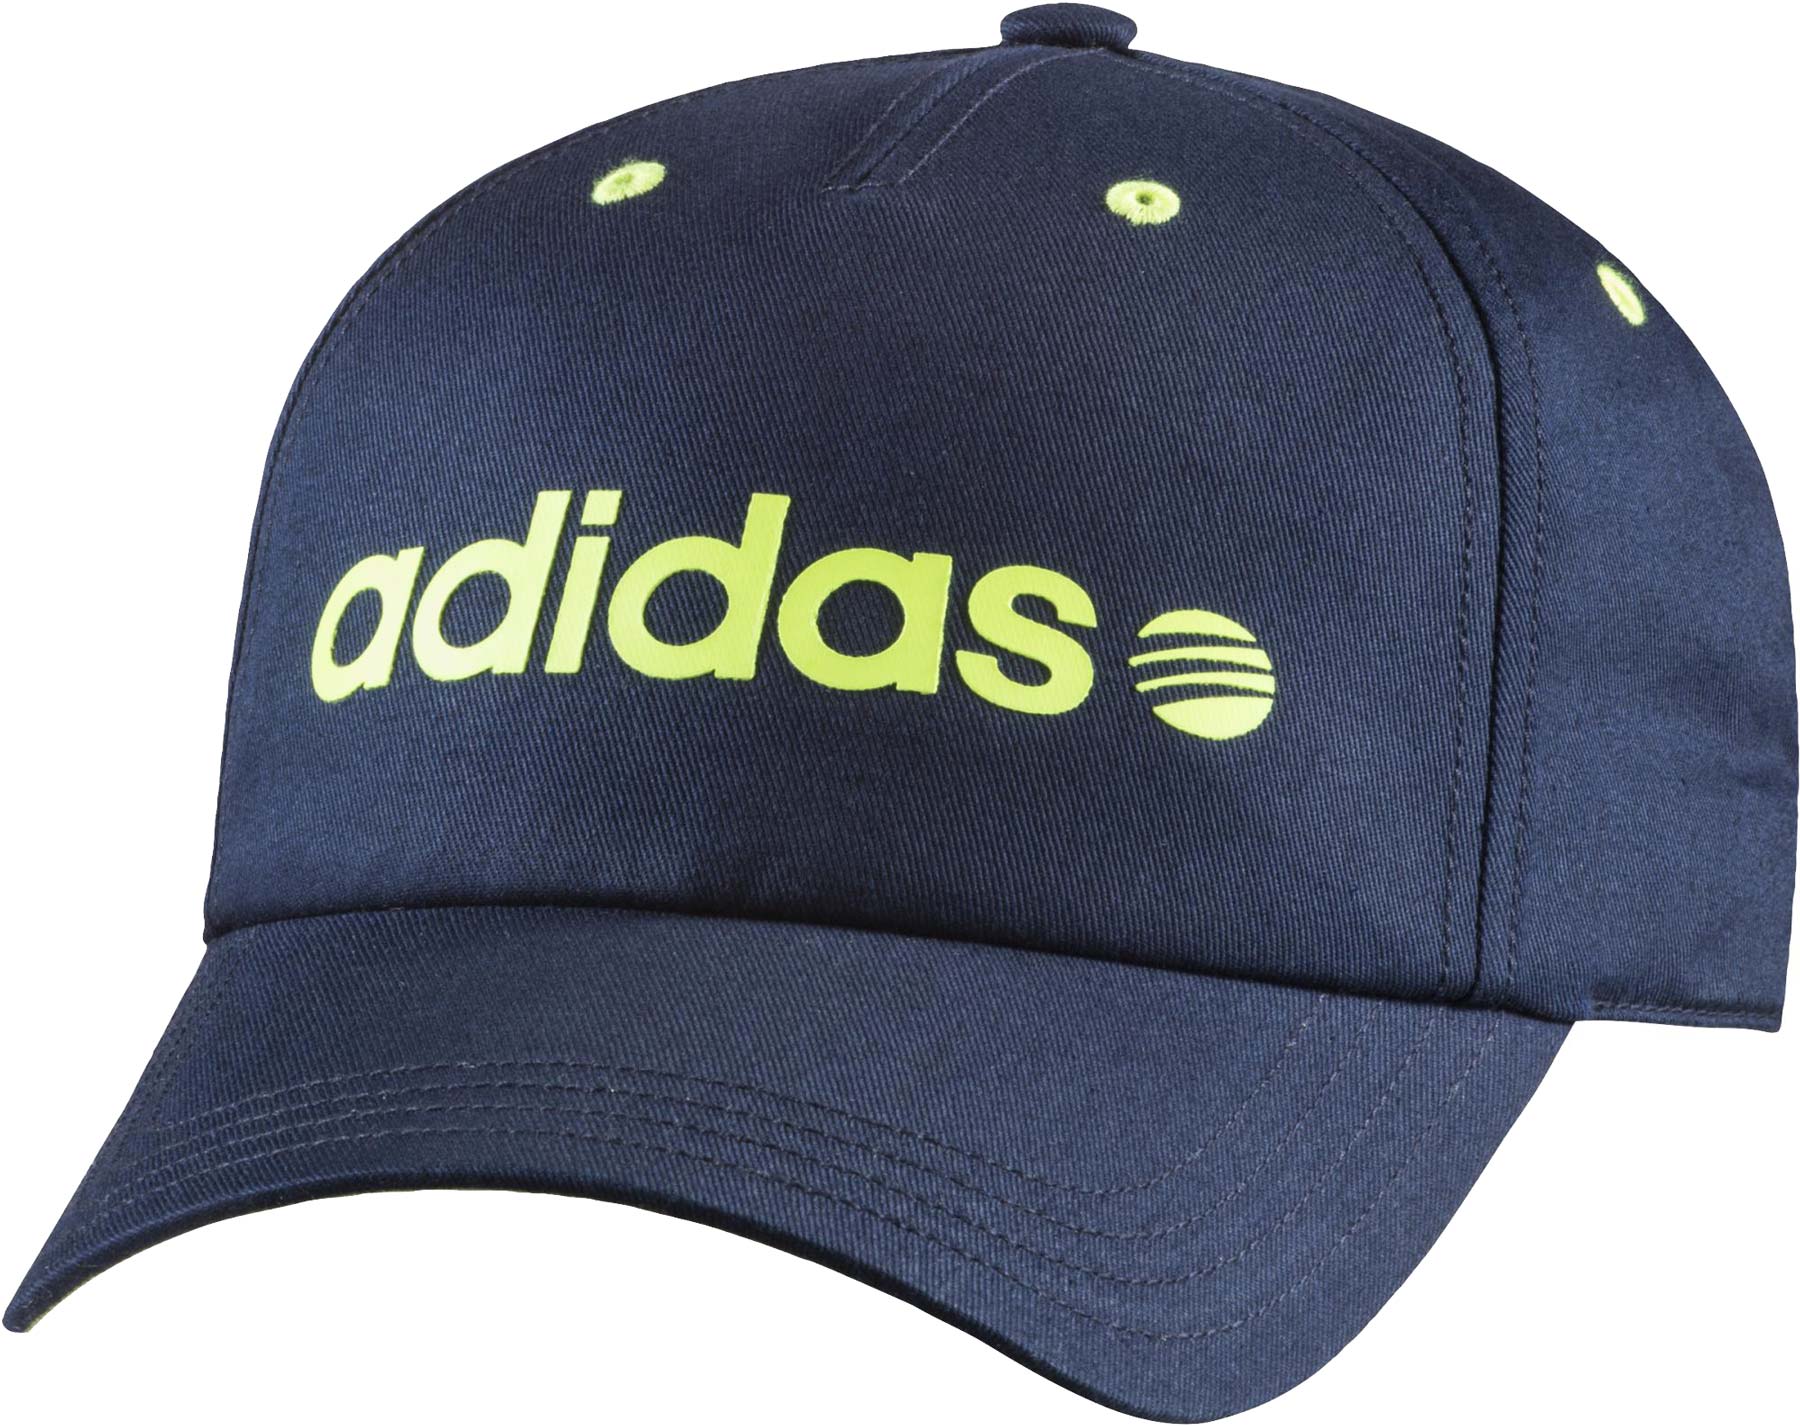 adidas neo hat off 73% - icrating.se